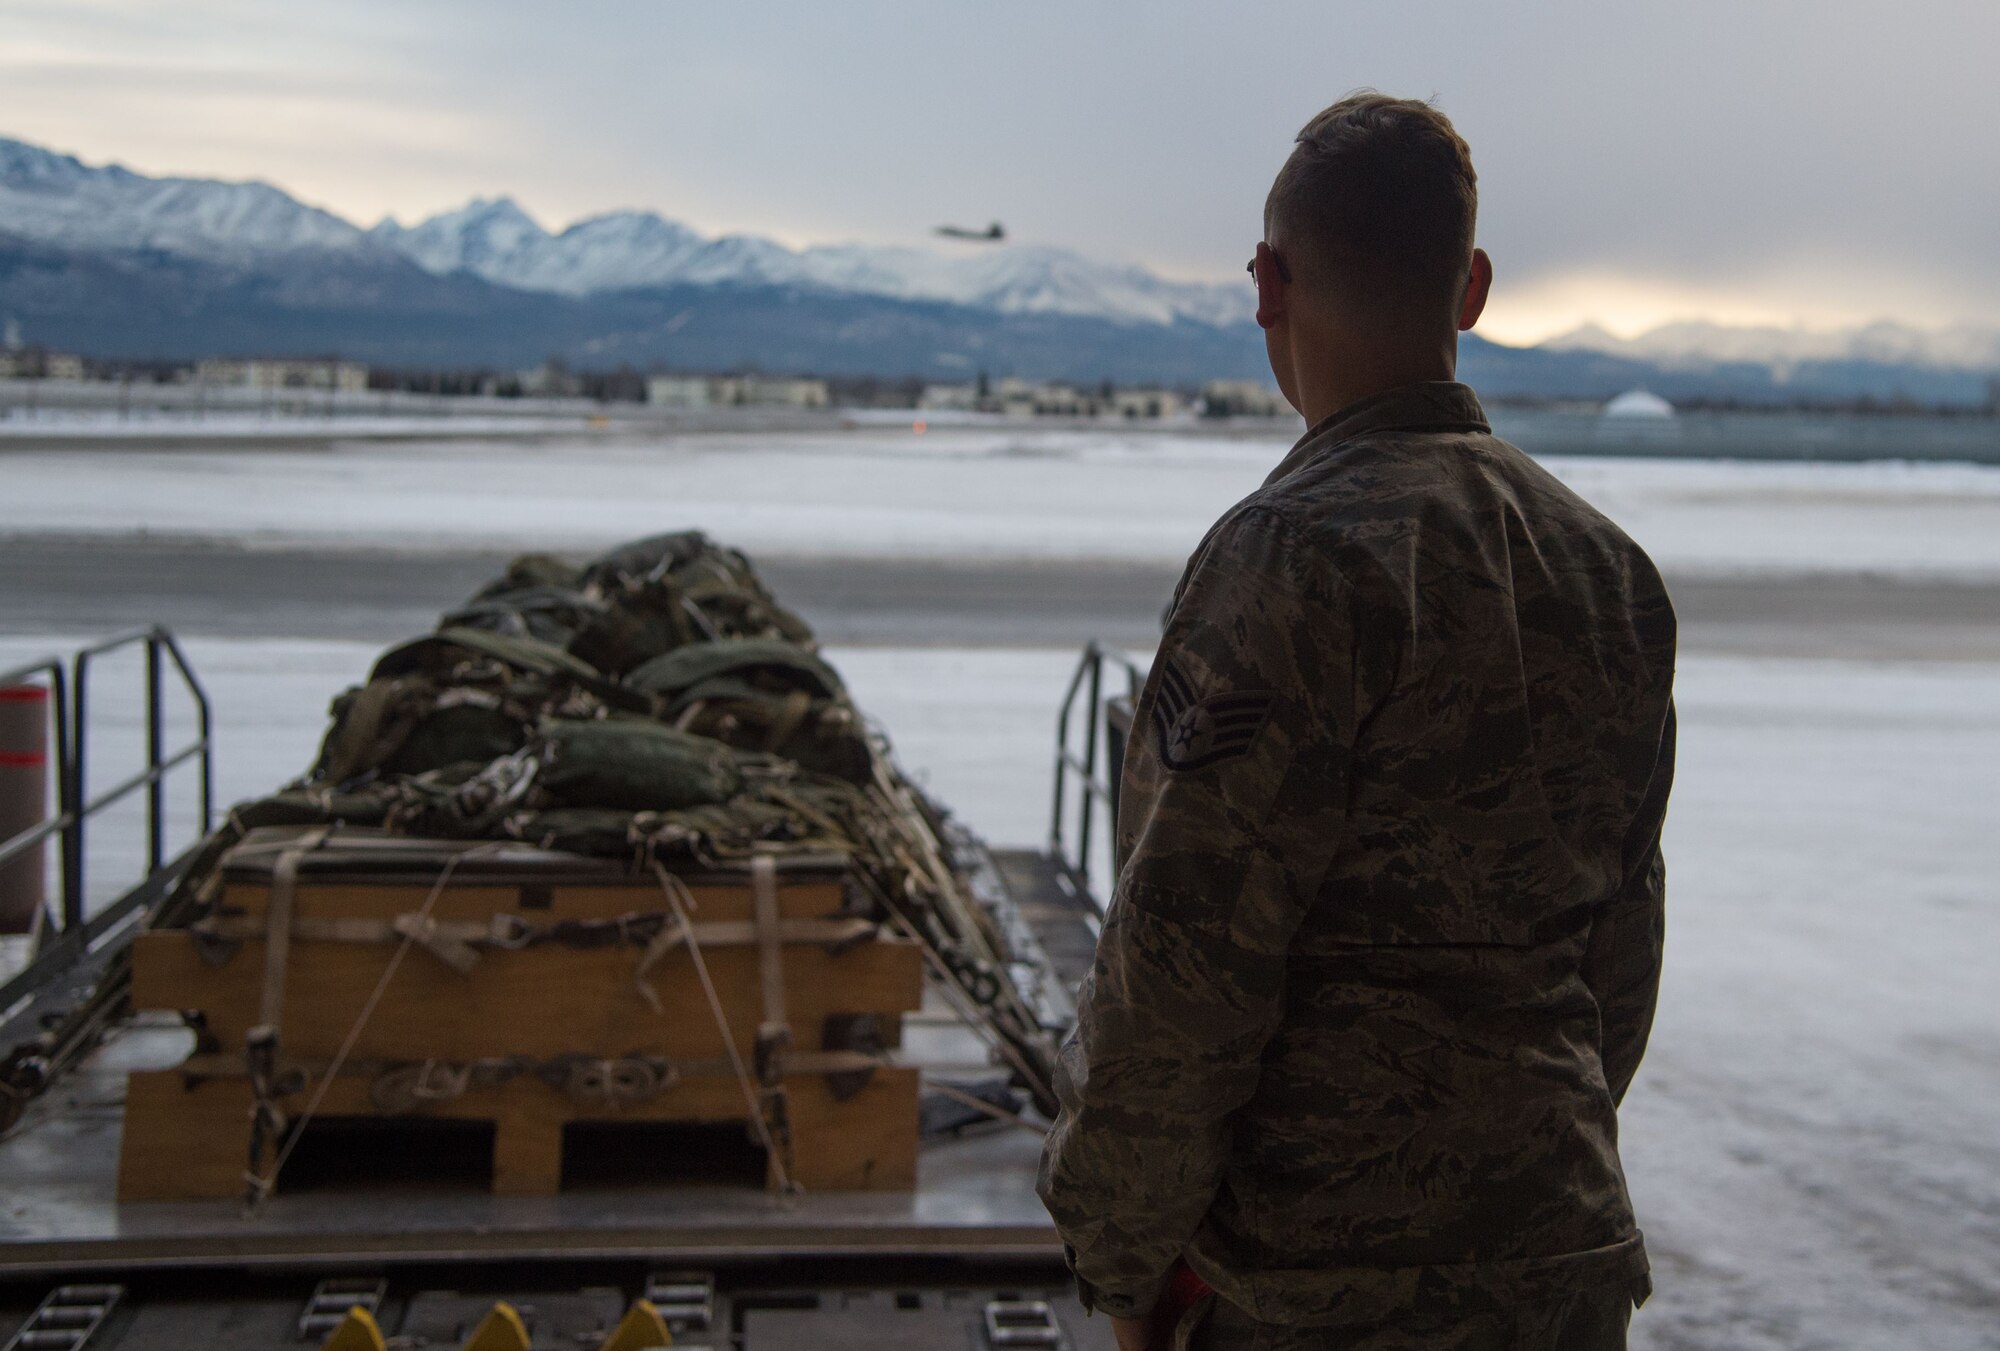 U.S. Air Force Staff Sgt. Douglas Moye, 773d Logistics Readiness Squadron combat mobility supervisor, oversees the departure of cargo pallets on a Halvorsen Loader at Joint Base Elmendorf-Richardson, Alaska, Jan. 18, 2018. The Halvorsen Loader is a rapidly deployable, high-reach mechanized aircraft loader that can transport and lift up to 25,000 pounds of cargo and load it onto military and civilian aircraft. JBER’s combat mobility flight is the largest in PACAF, providing C-130 Hercules and C-17 Globemaster III unilateral airdrop and airland training for two wings and three squadrons while at home station, as well as all of the airdrop training to Red Flag Alaska.